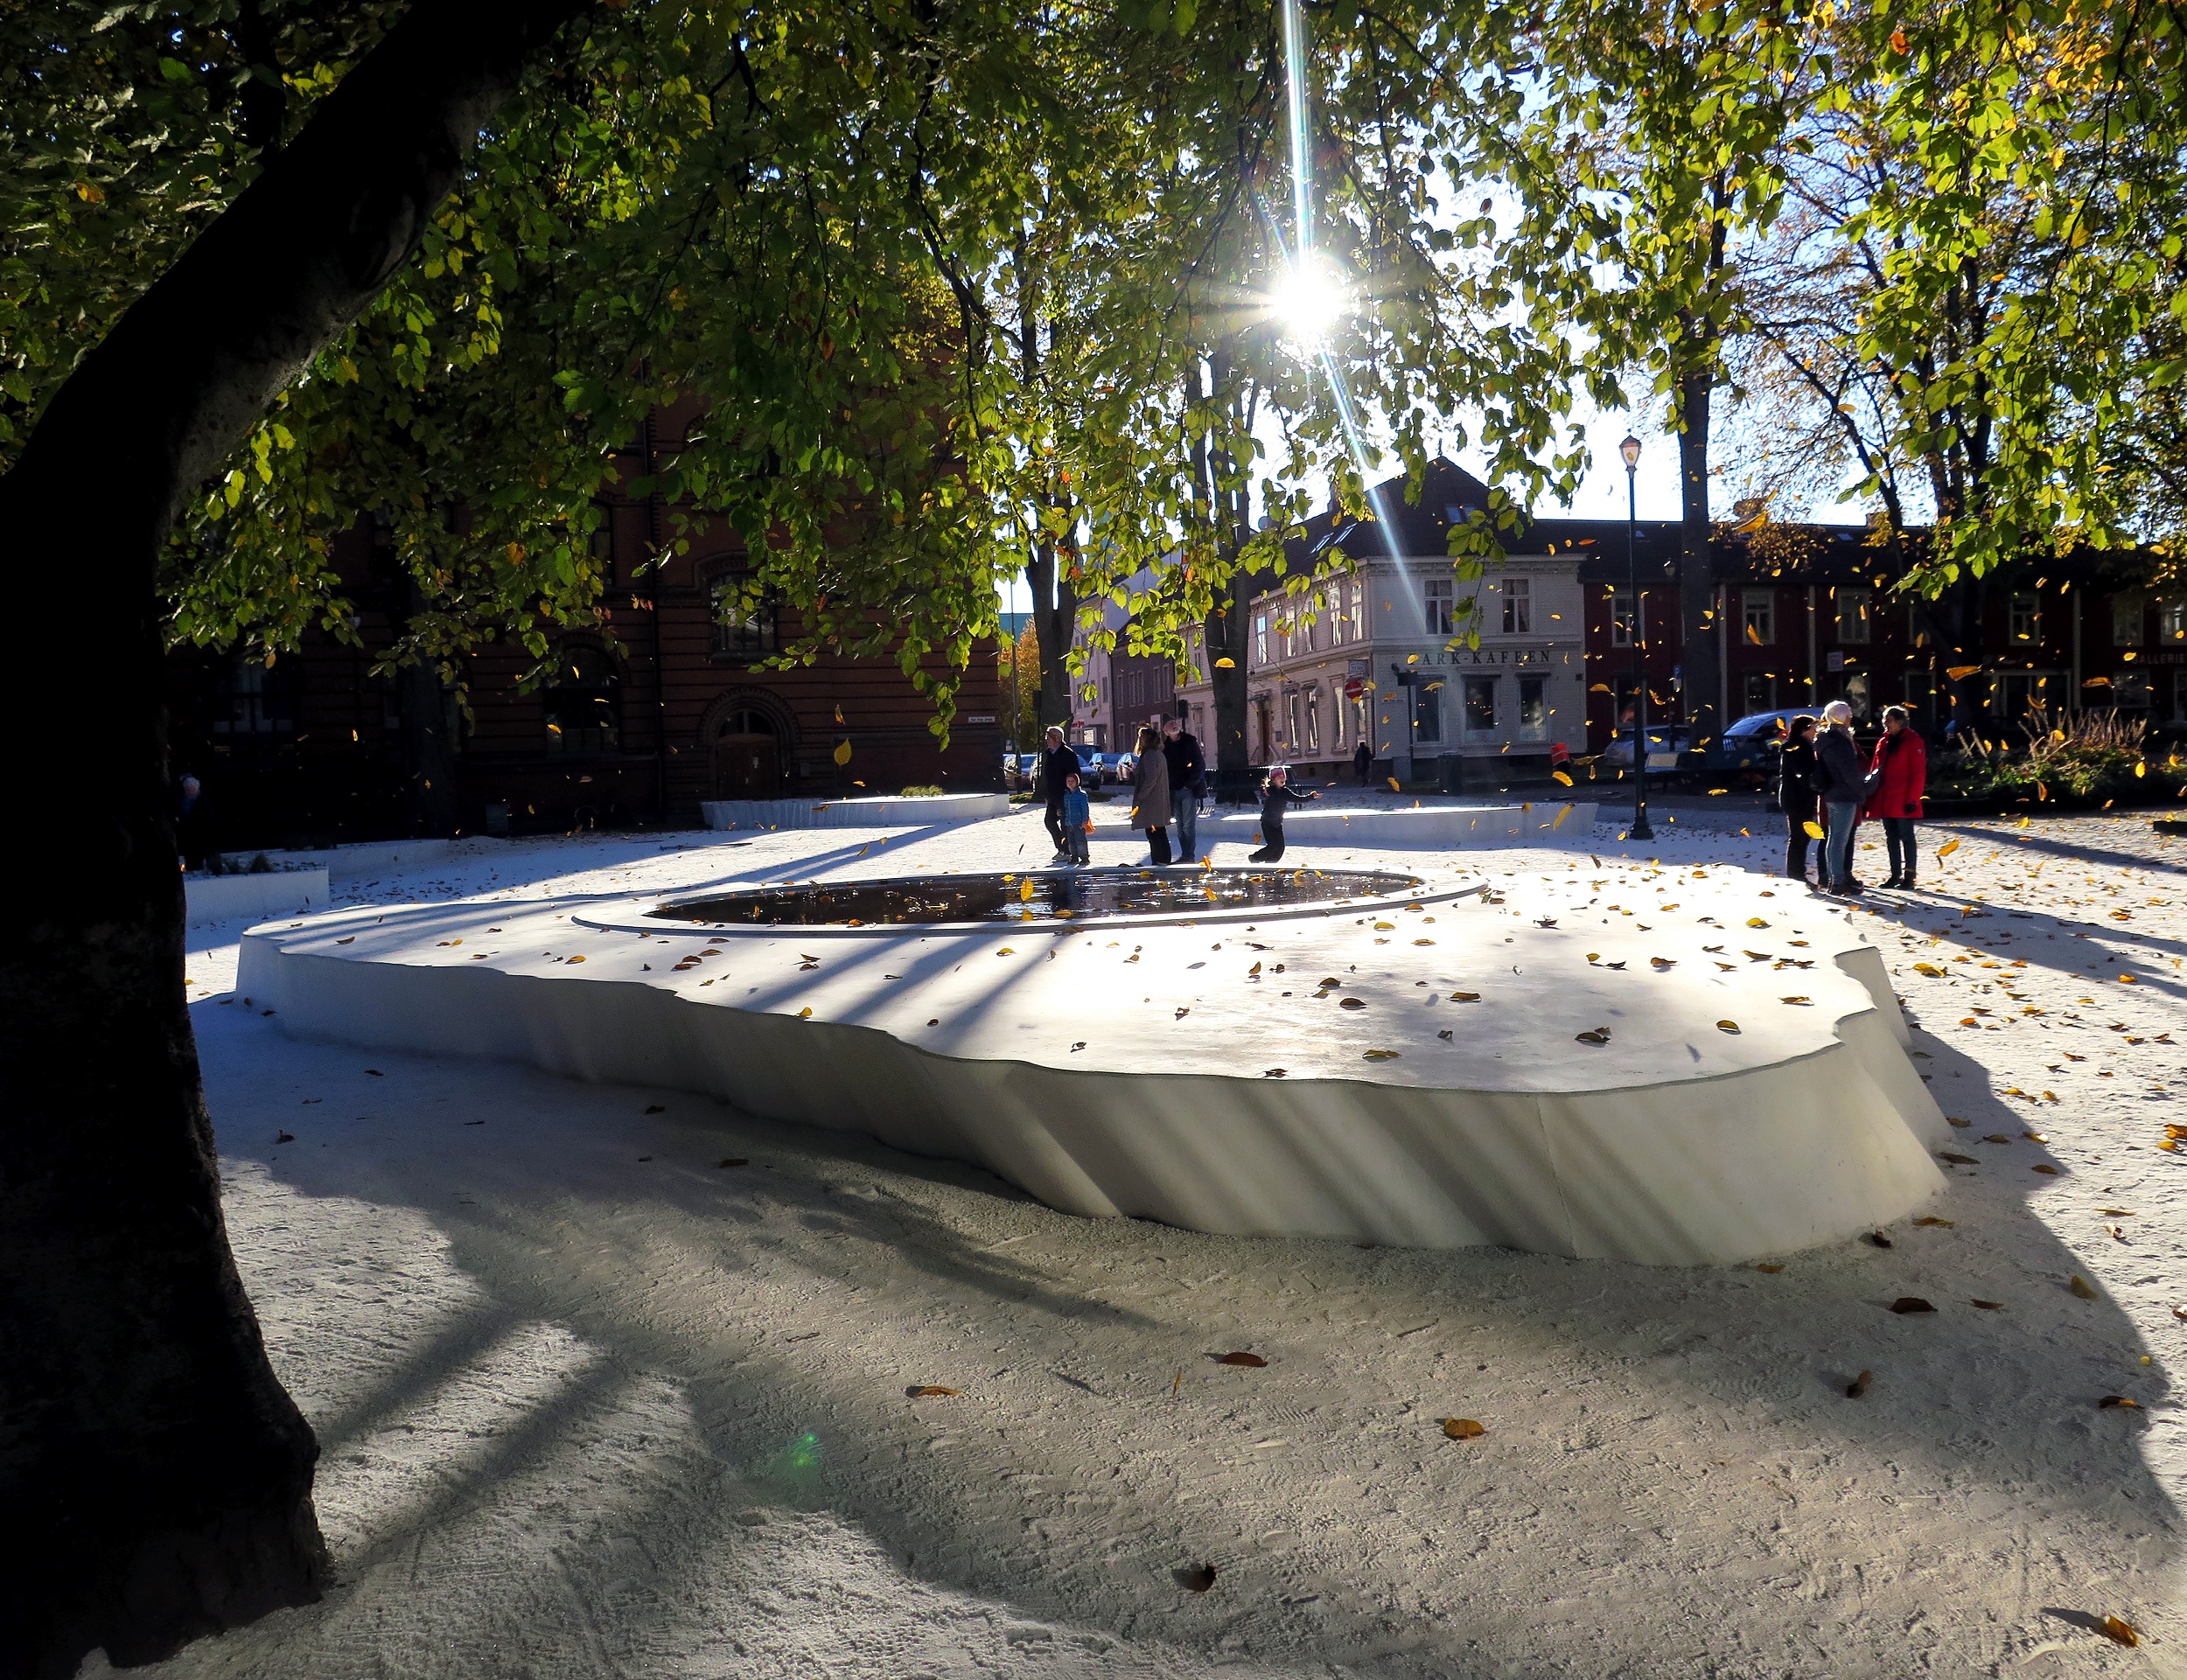 Sunlit view of a park with an outdoor sculpture consisting of an irregular flat form about a half-meter high, with an aperture in the middle